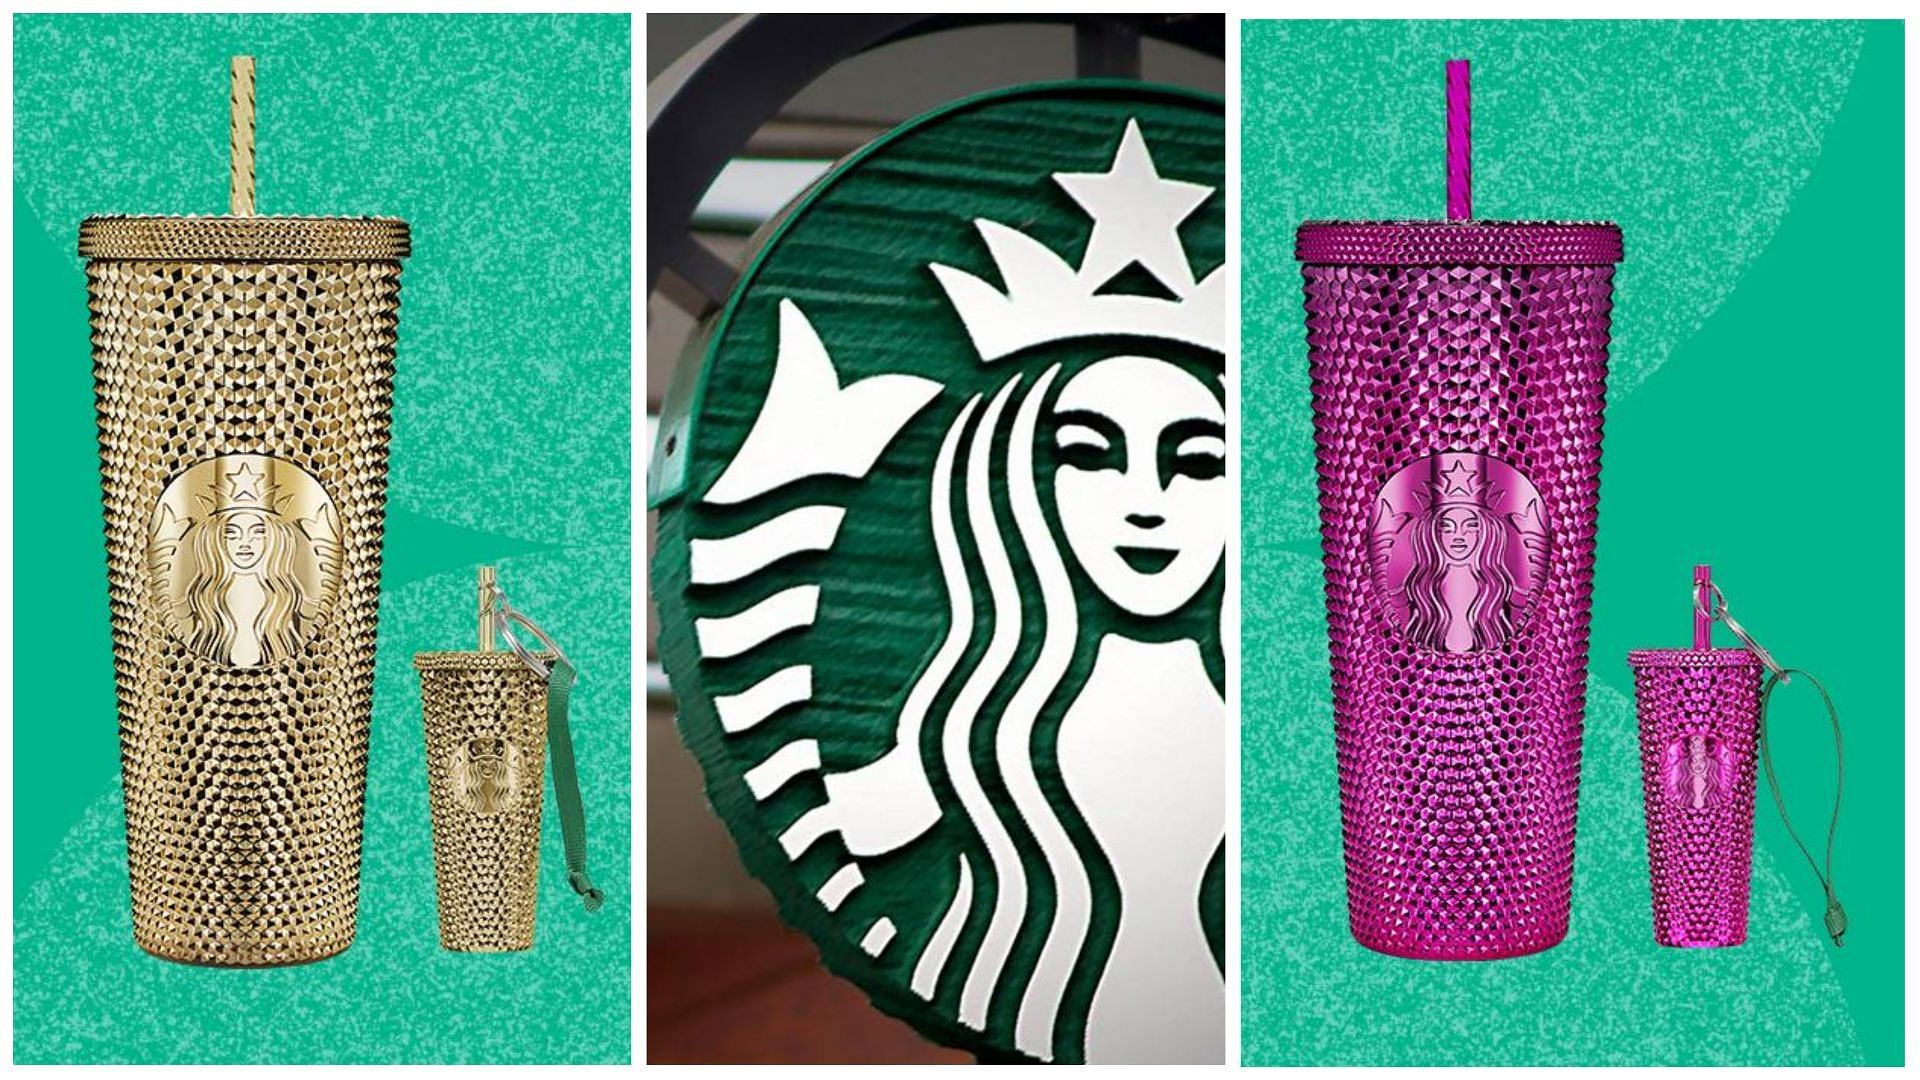 Starbucks' 2022 Holiday Cup Lineup Features Some Eye-Catching Designs